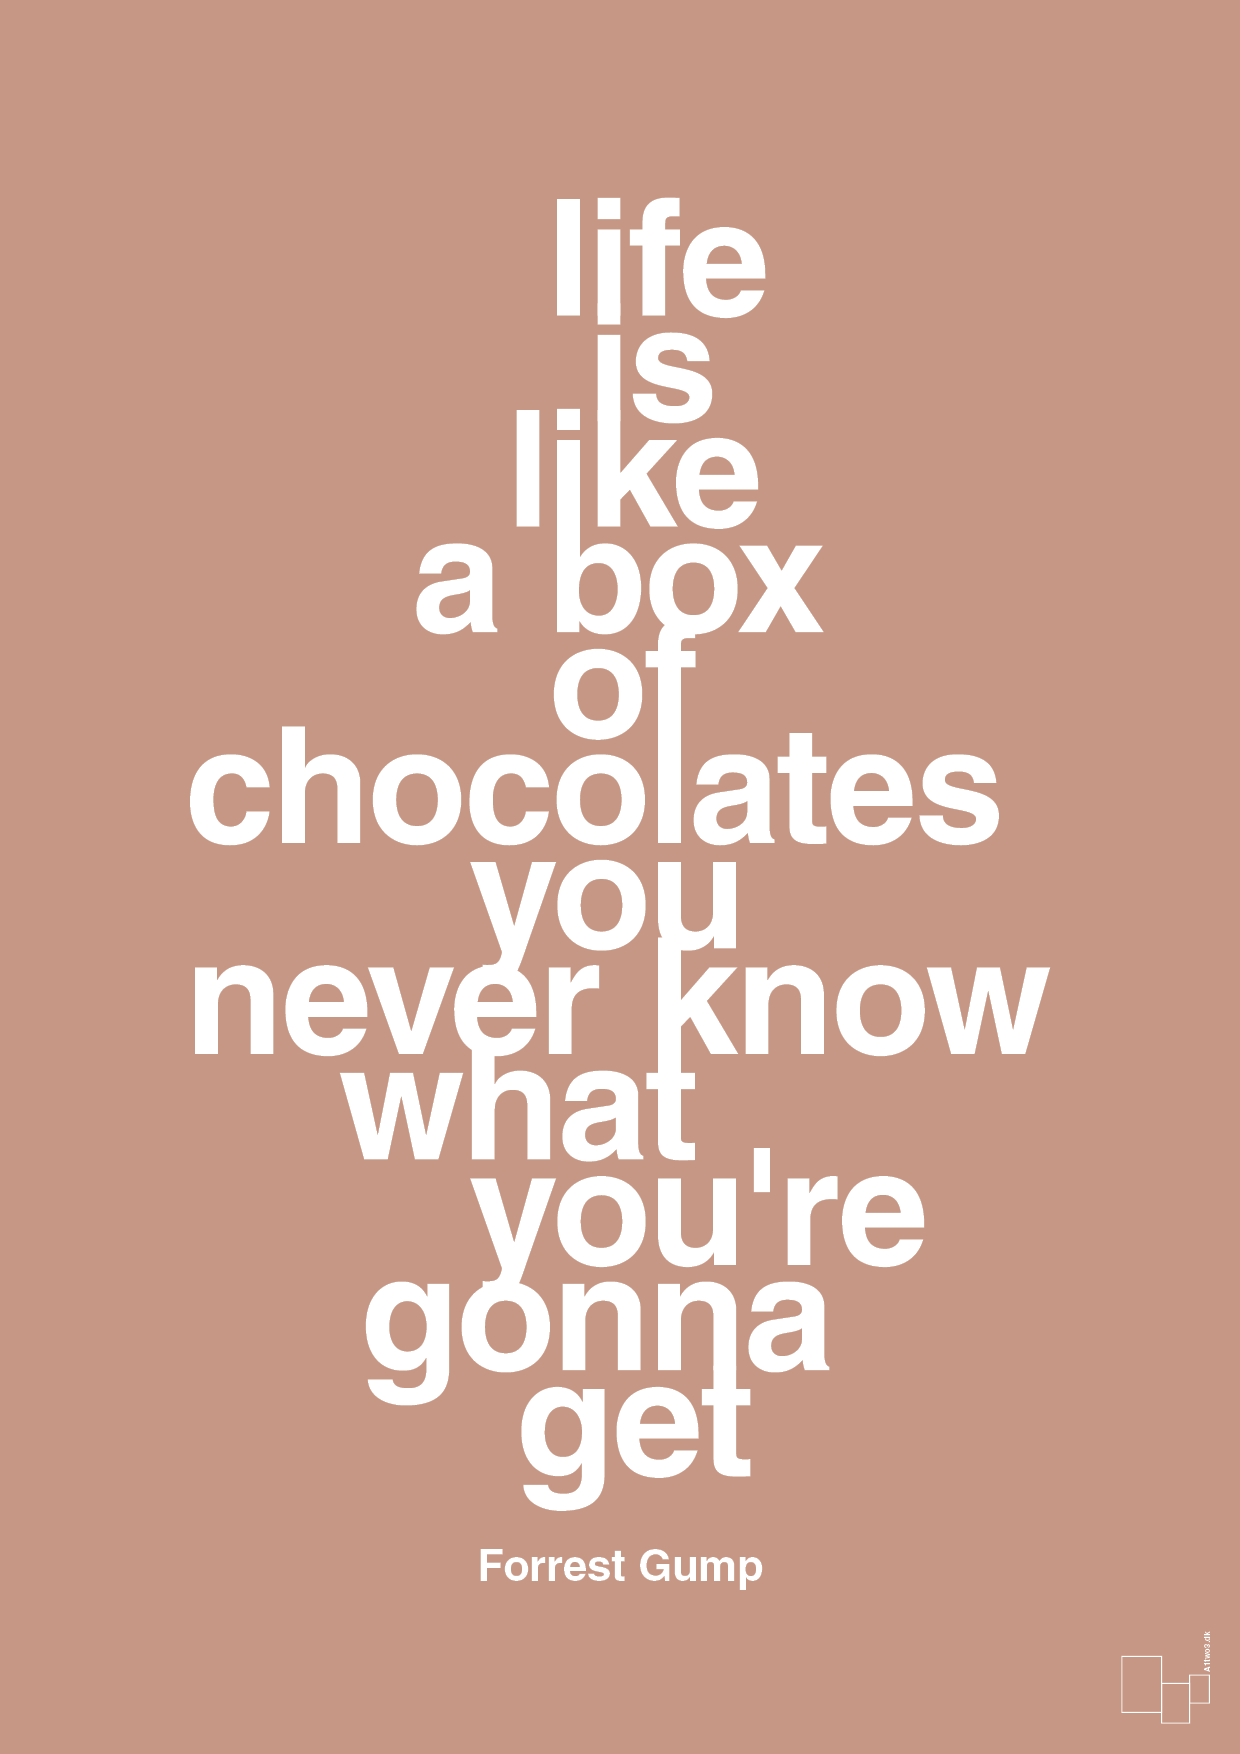 life is like a box of chocolates you never know what you're gonna get - Plakat med Citater i Powder